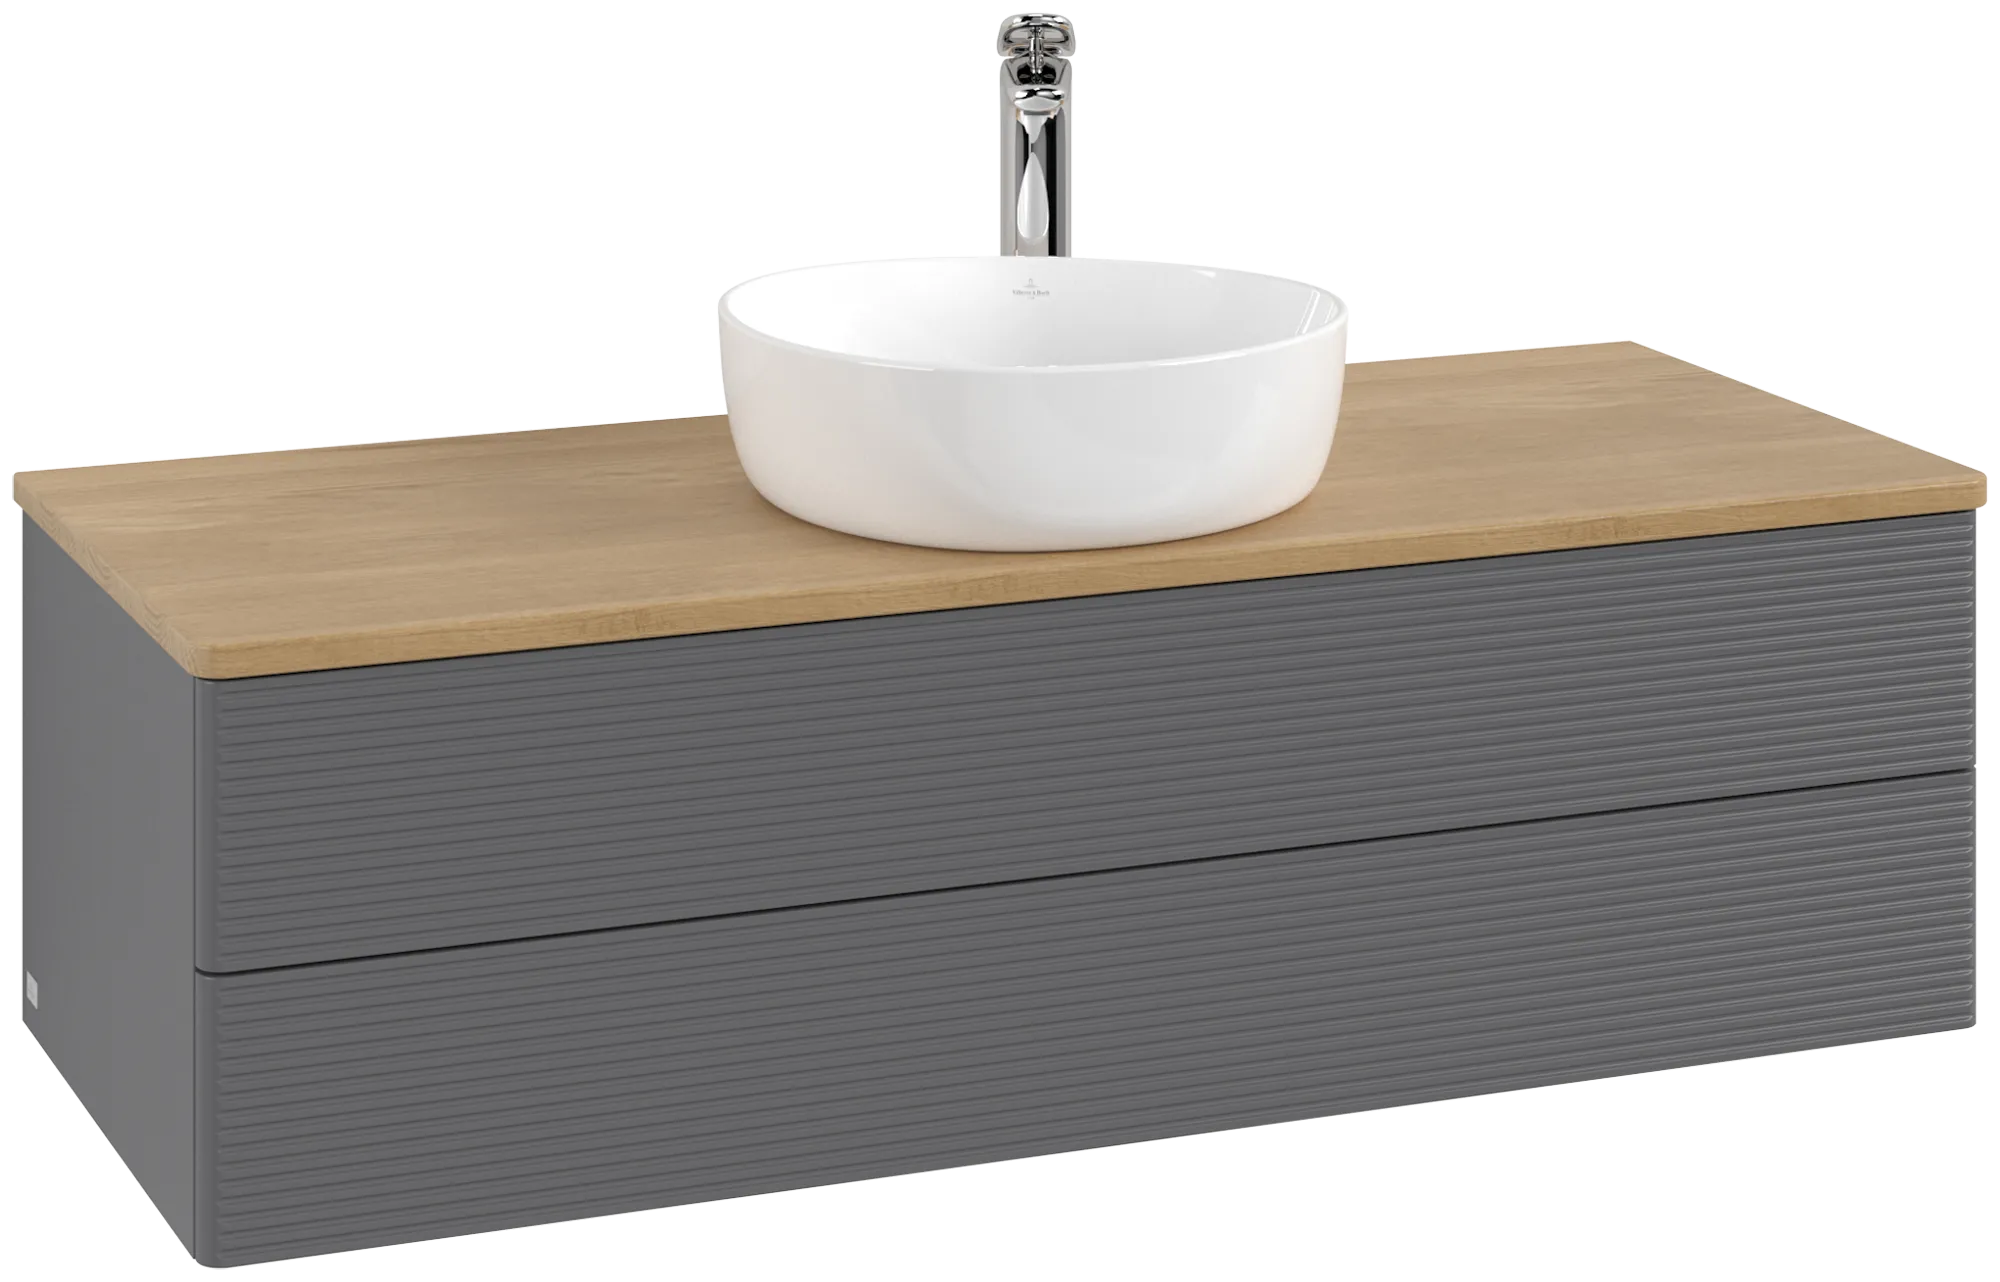 Picture of VILLEROY BOCH Antao Vanity unit, 2 pull-out compartments, 1200 x 360 x 500 mm, Front with grain texture, Anthracite Matt Lacquer / Honey Oak #K21151GK